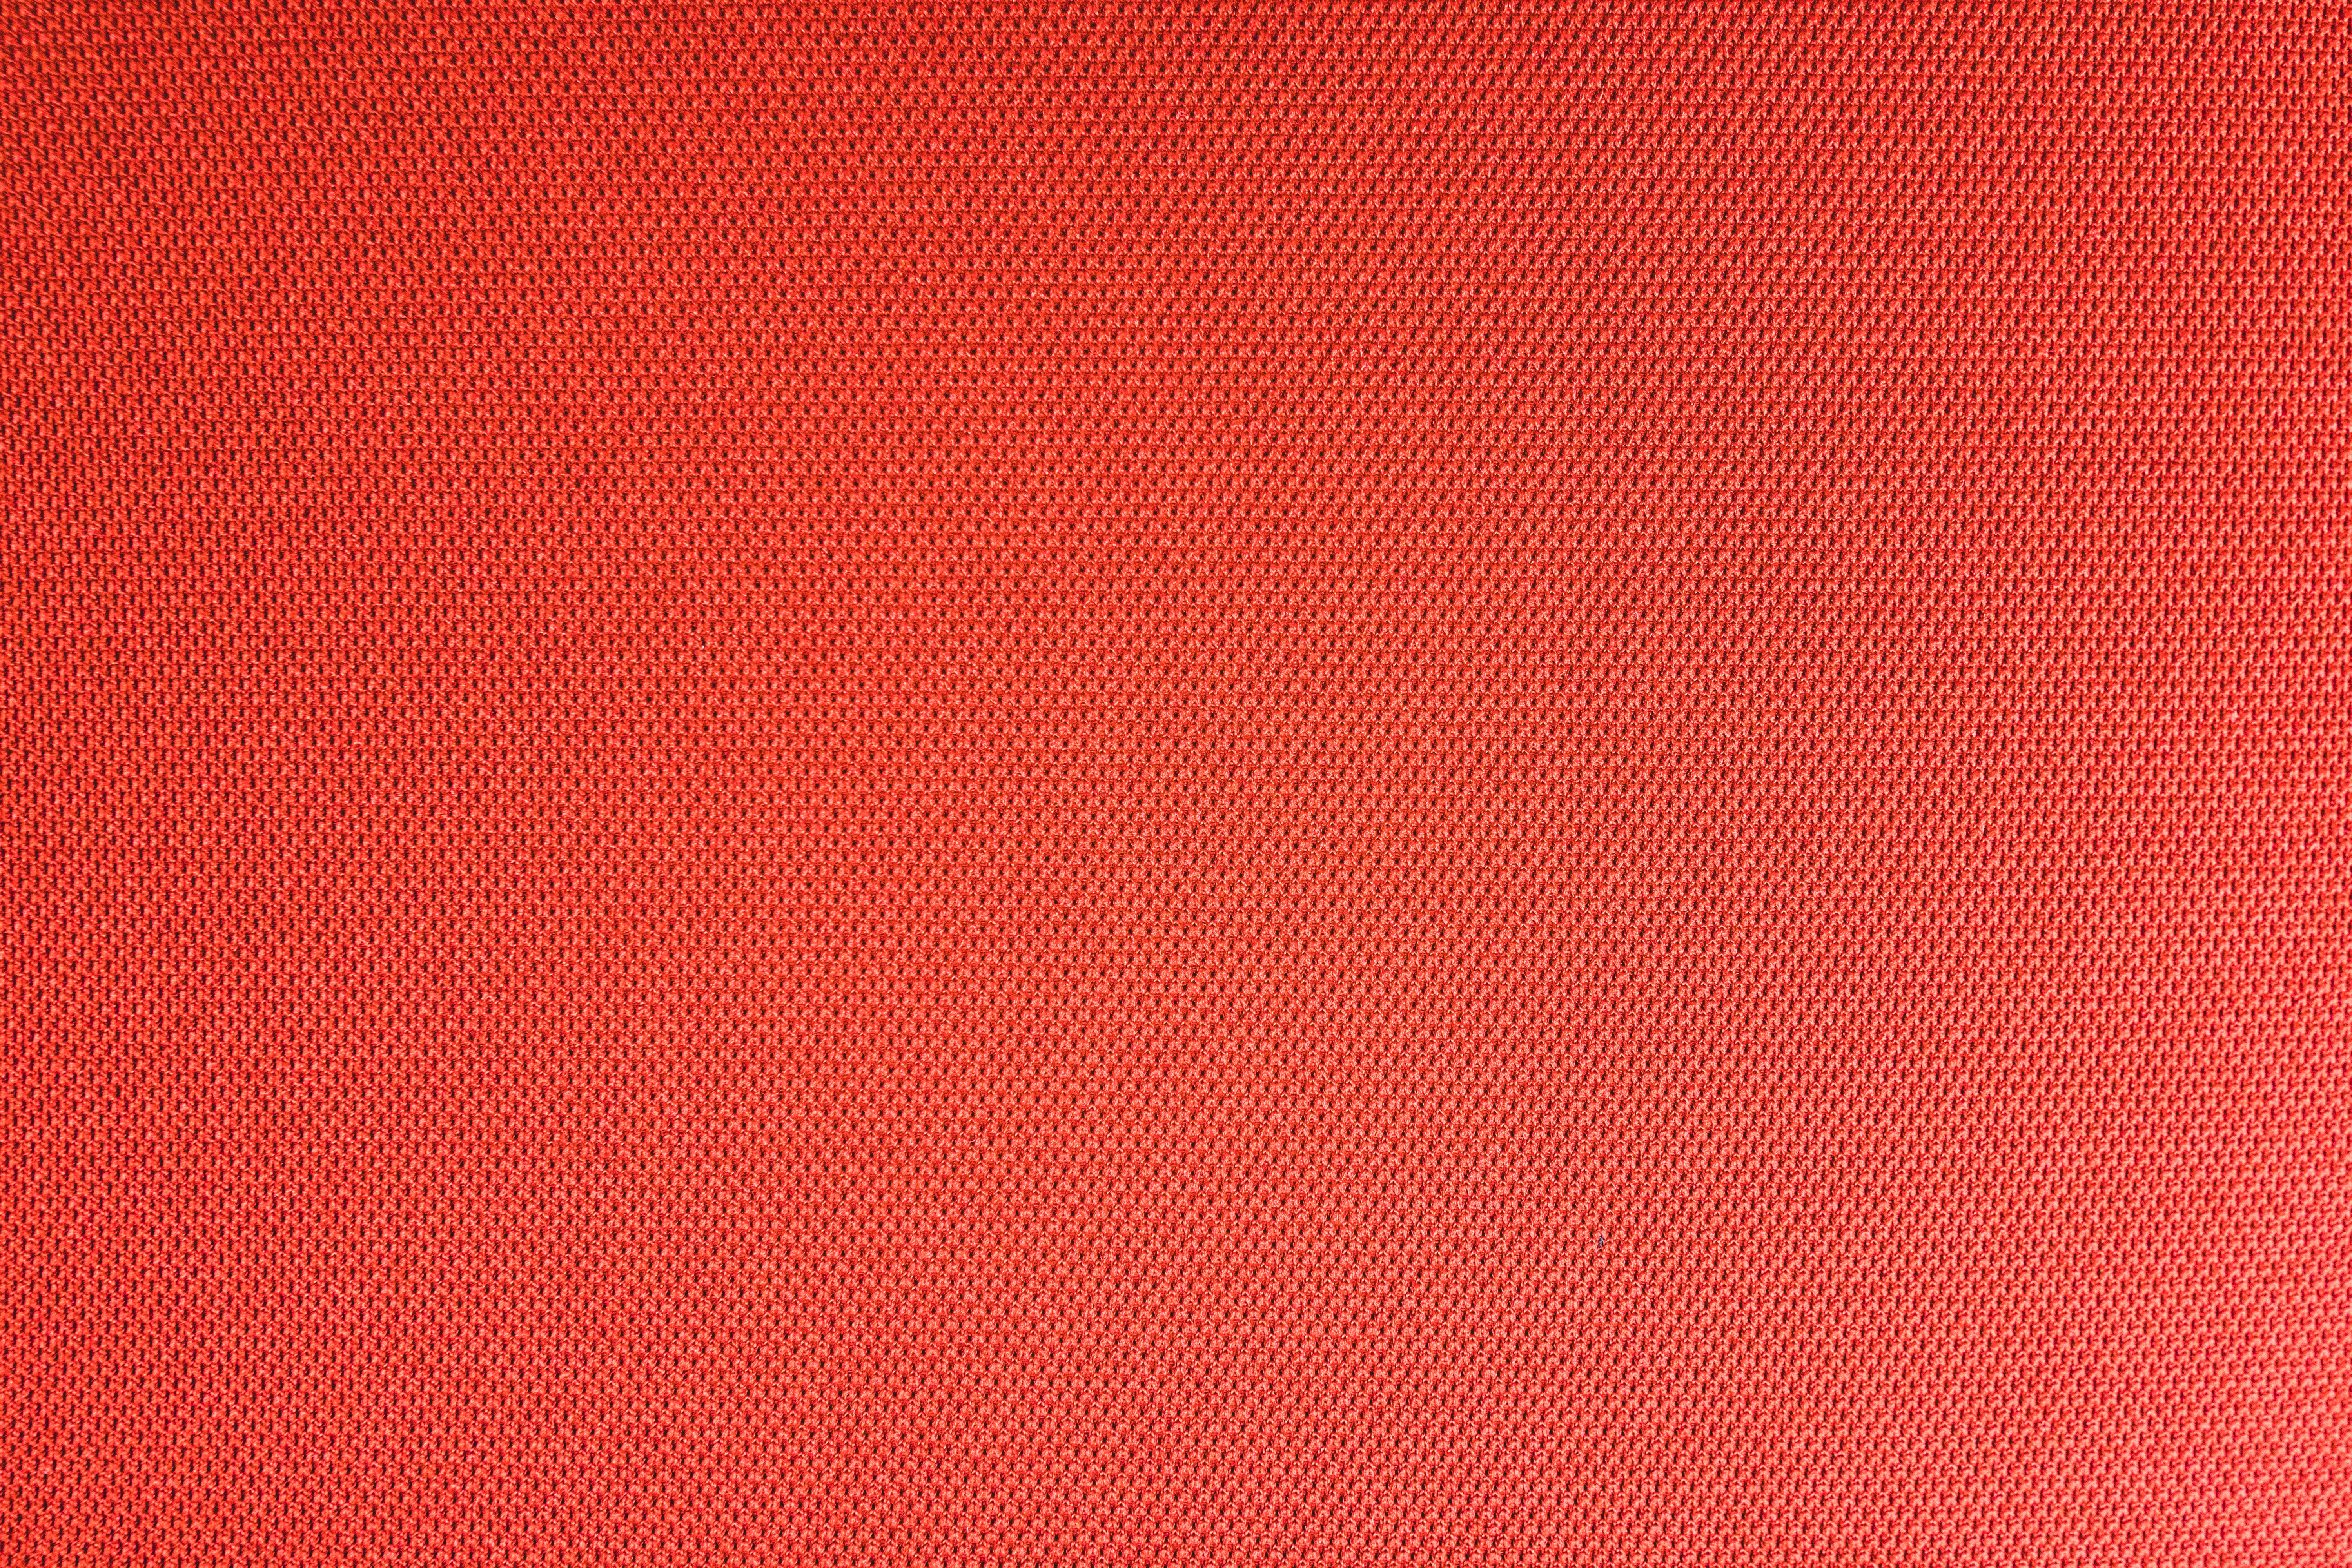 texture, textures, red, cloth